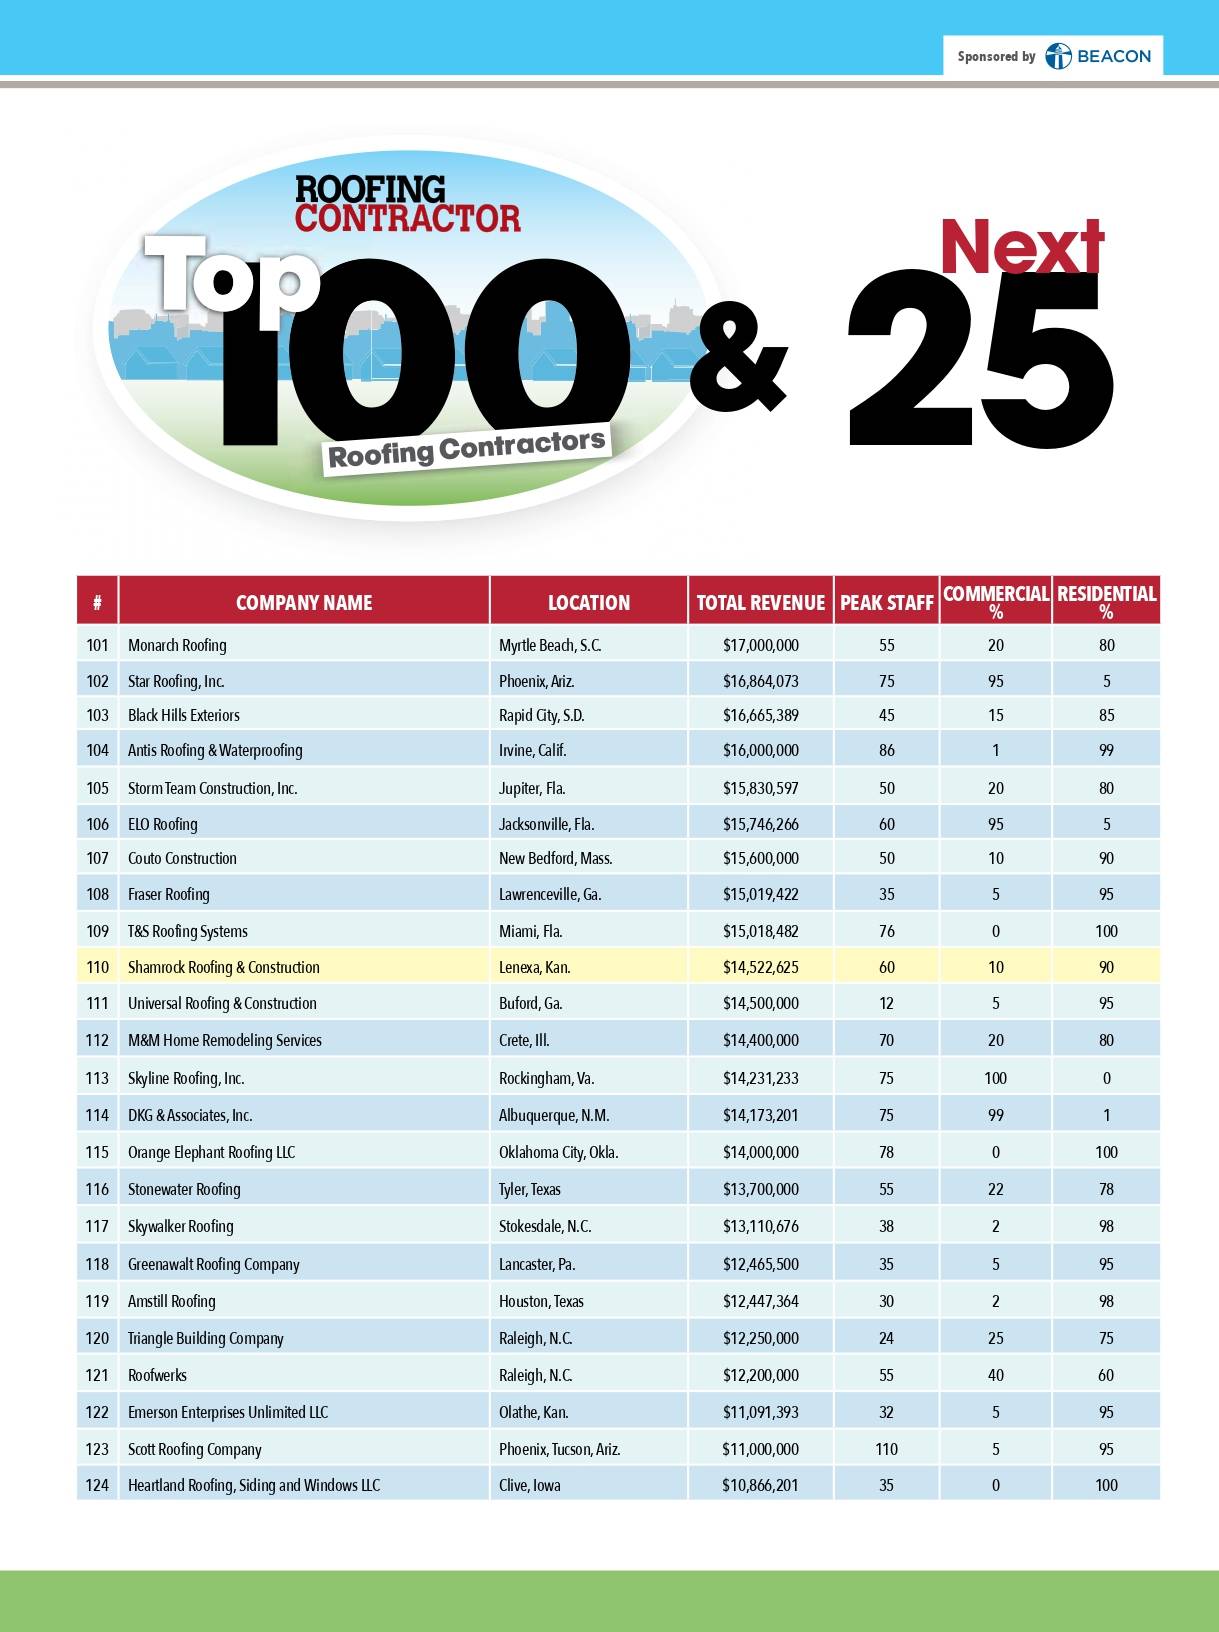 2021 Top 100 and Next 25 Roofing Contractors List